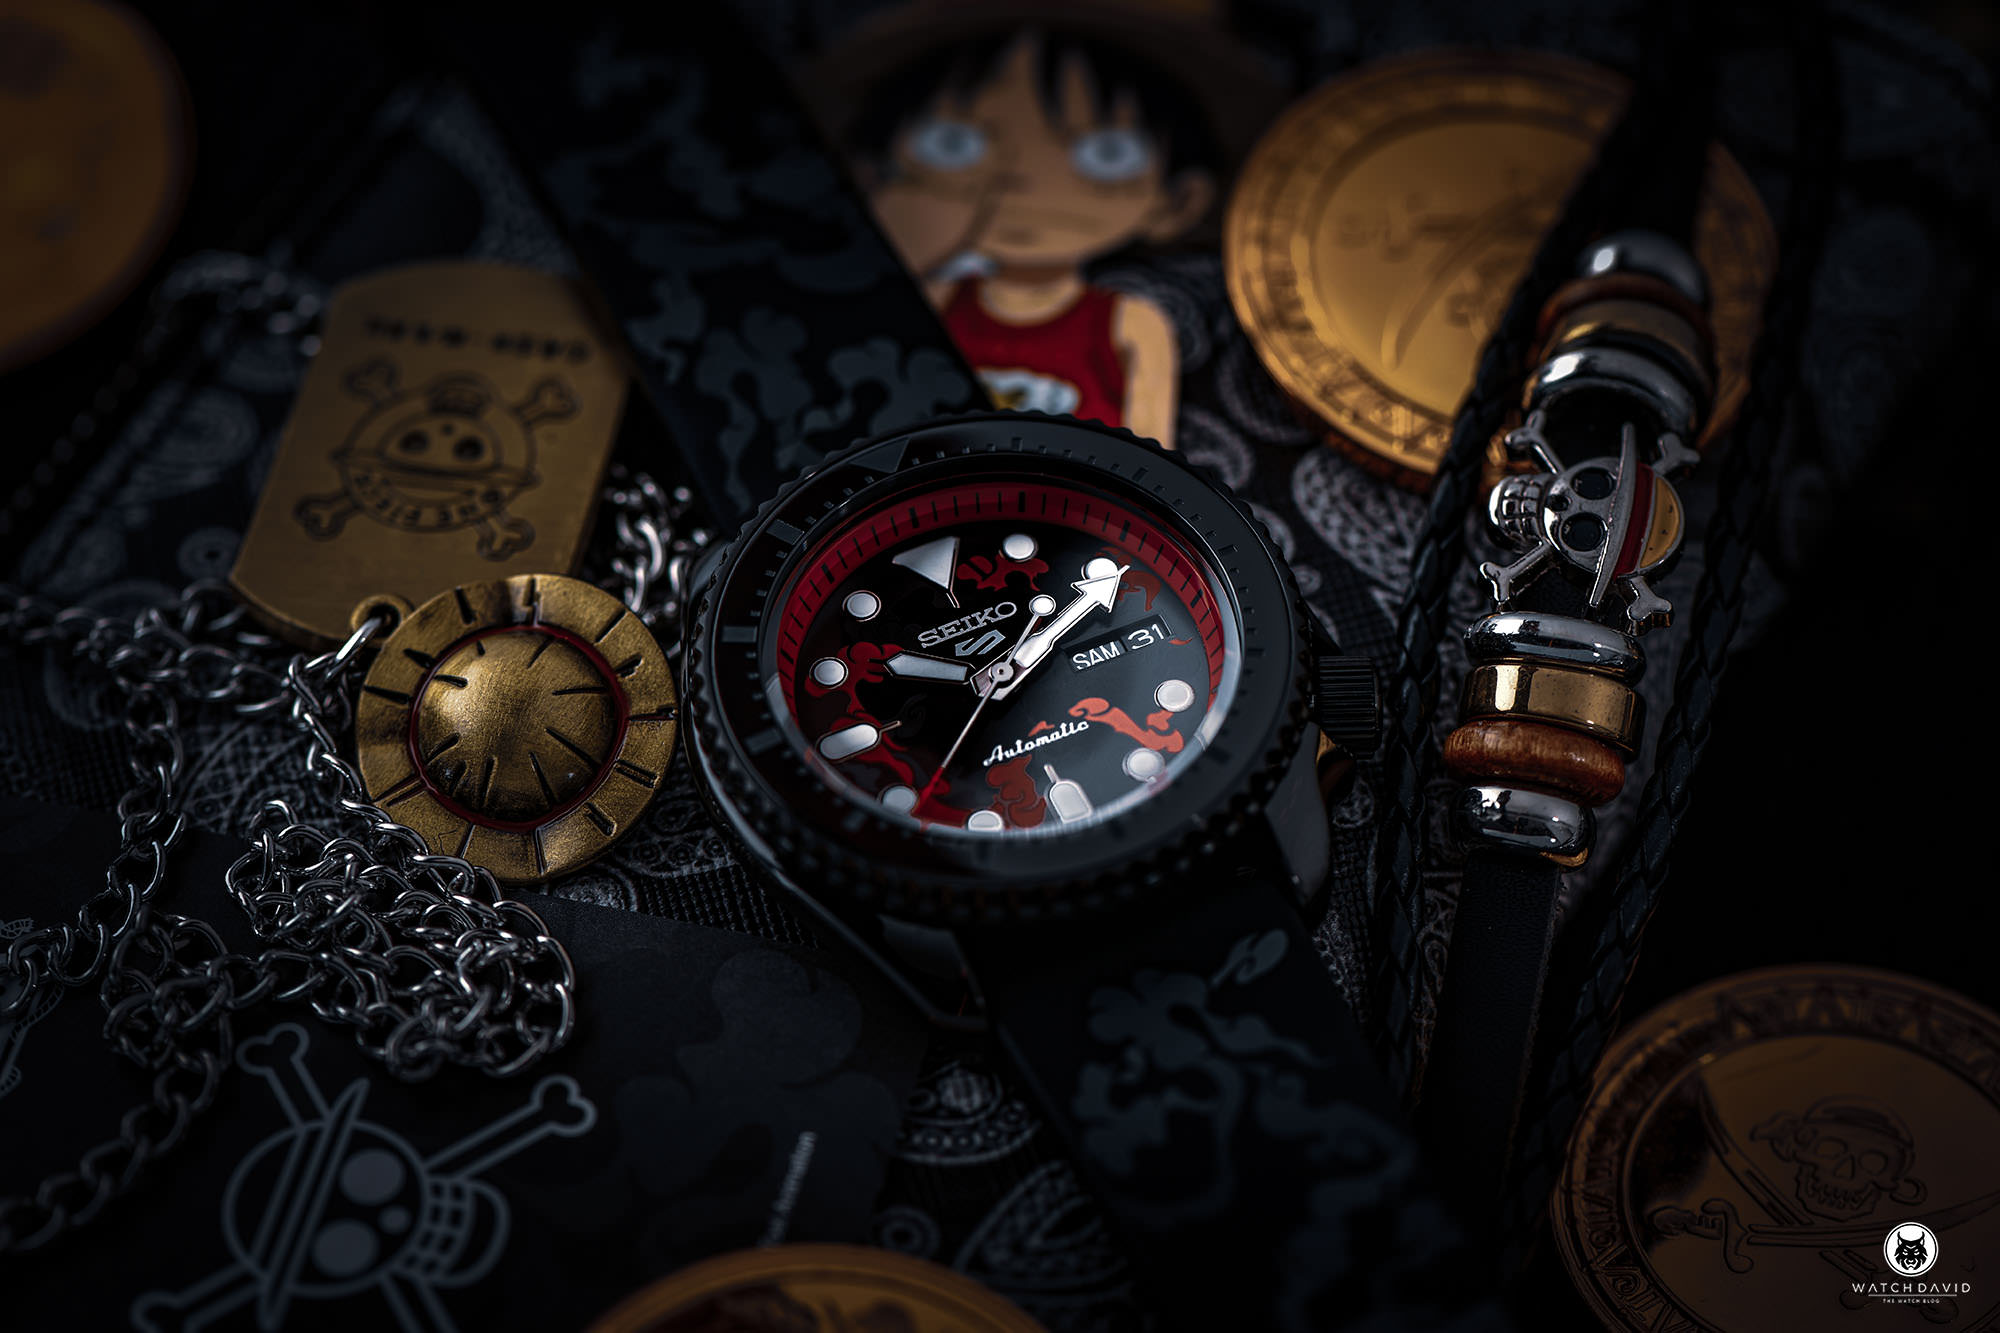 Seiko 5 Sports One Piece „Luffy“ SRPH65K1 Review